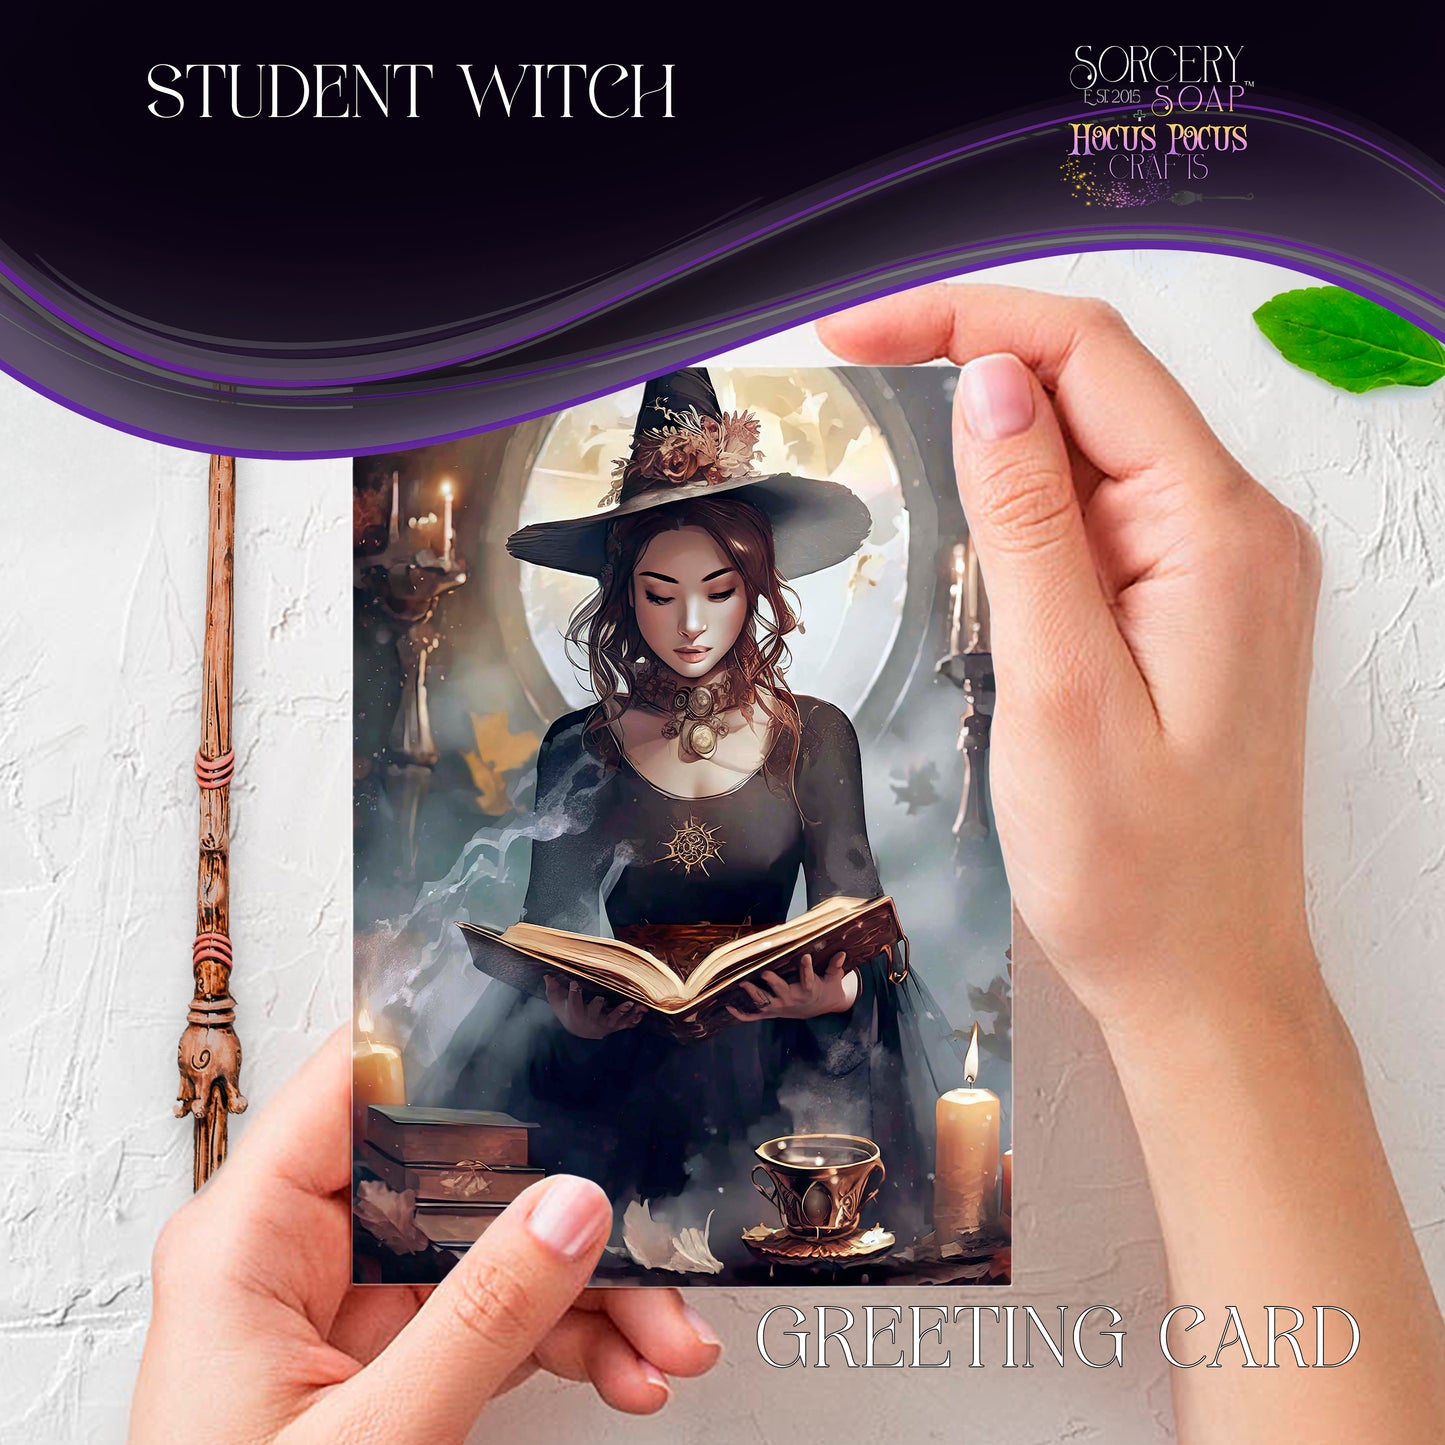 Student Witch Greeting Card